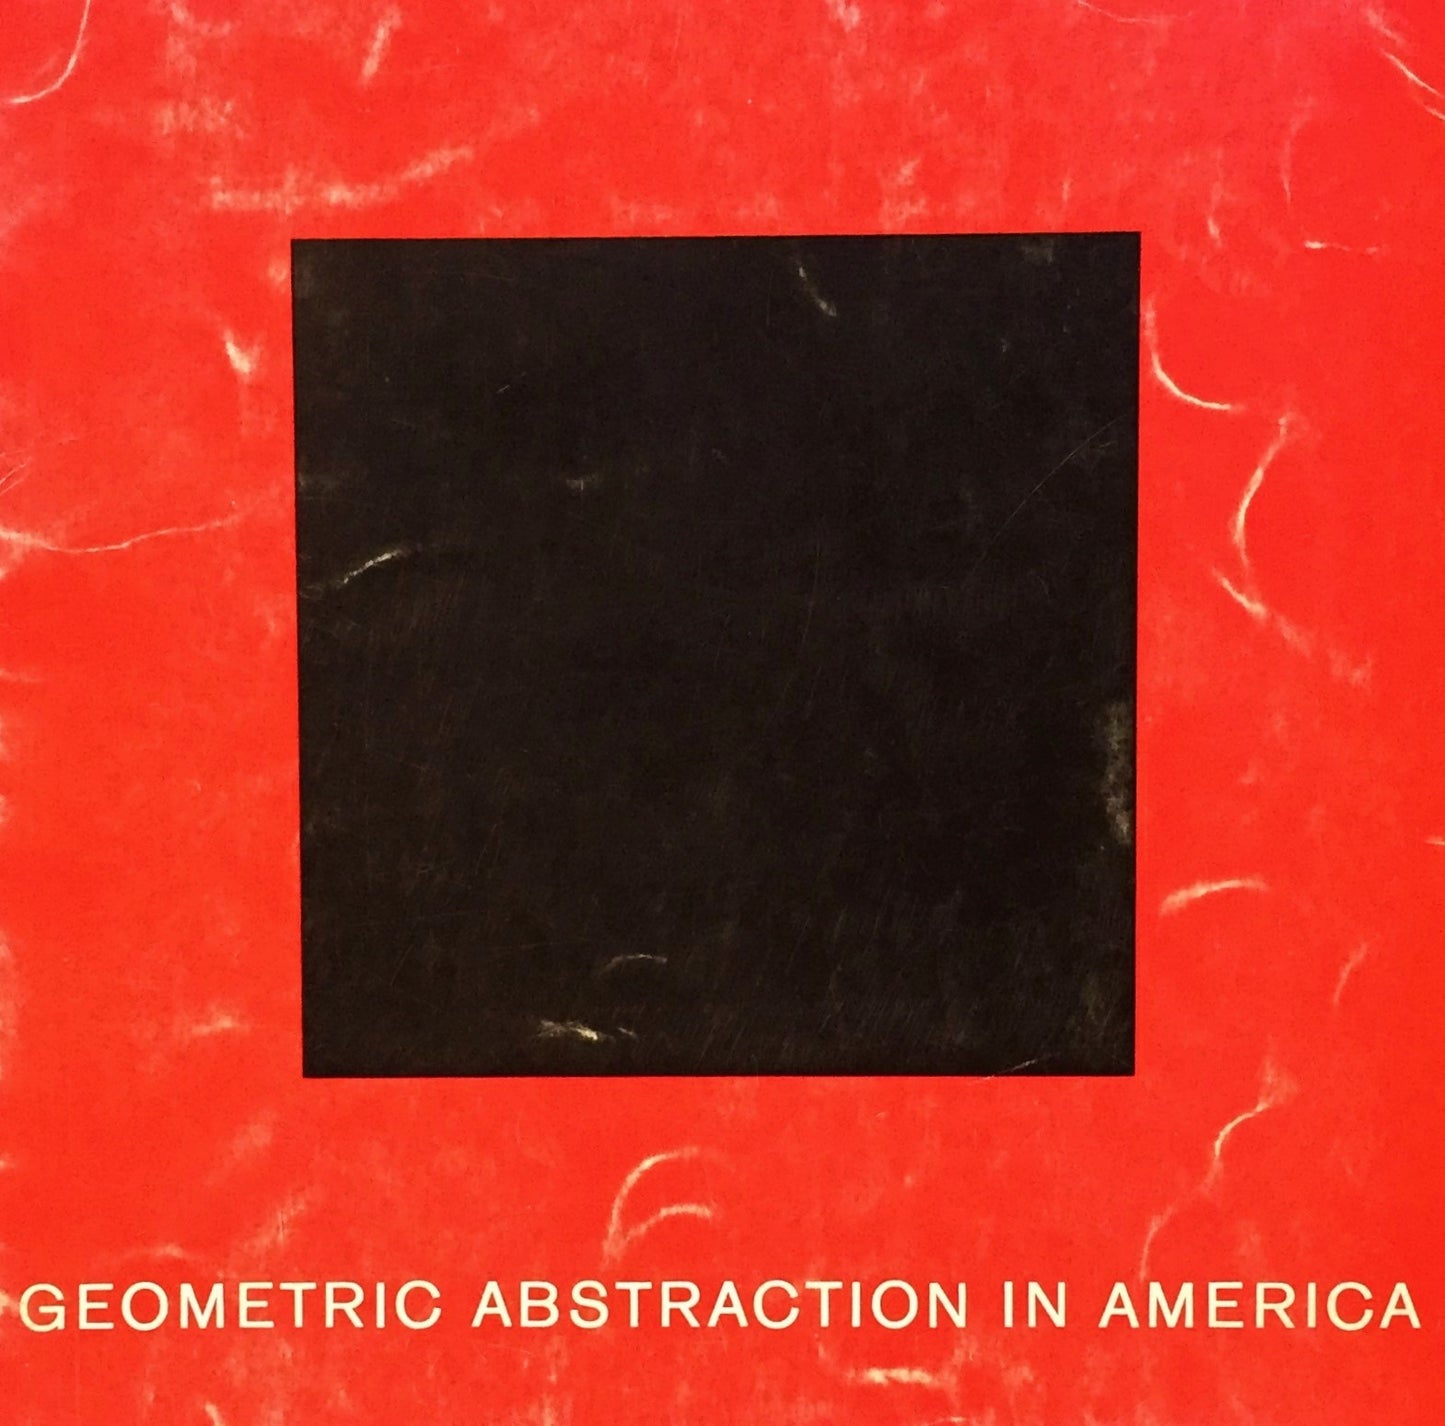 GEOMETRIC ABSTRACTION IN AMERICA展　カタログ